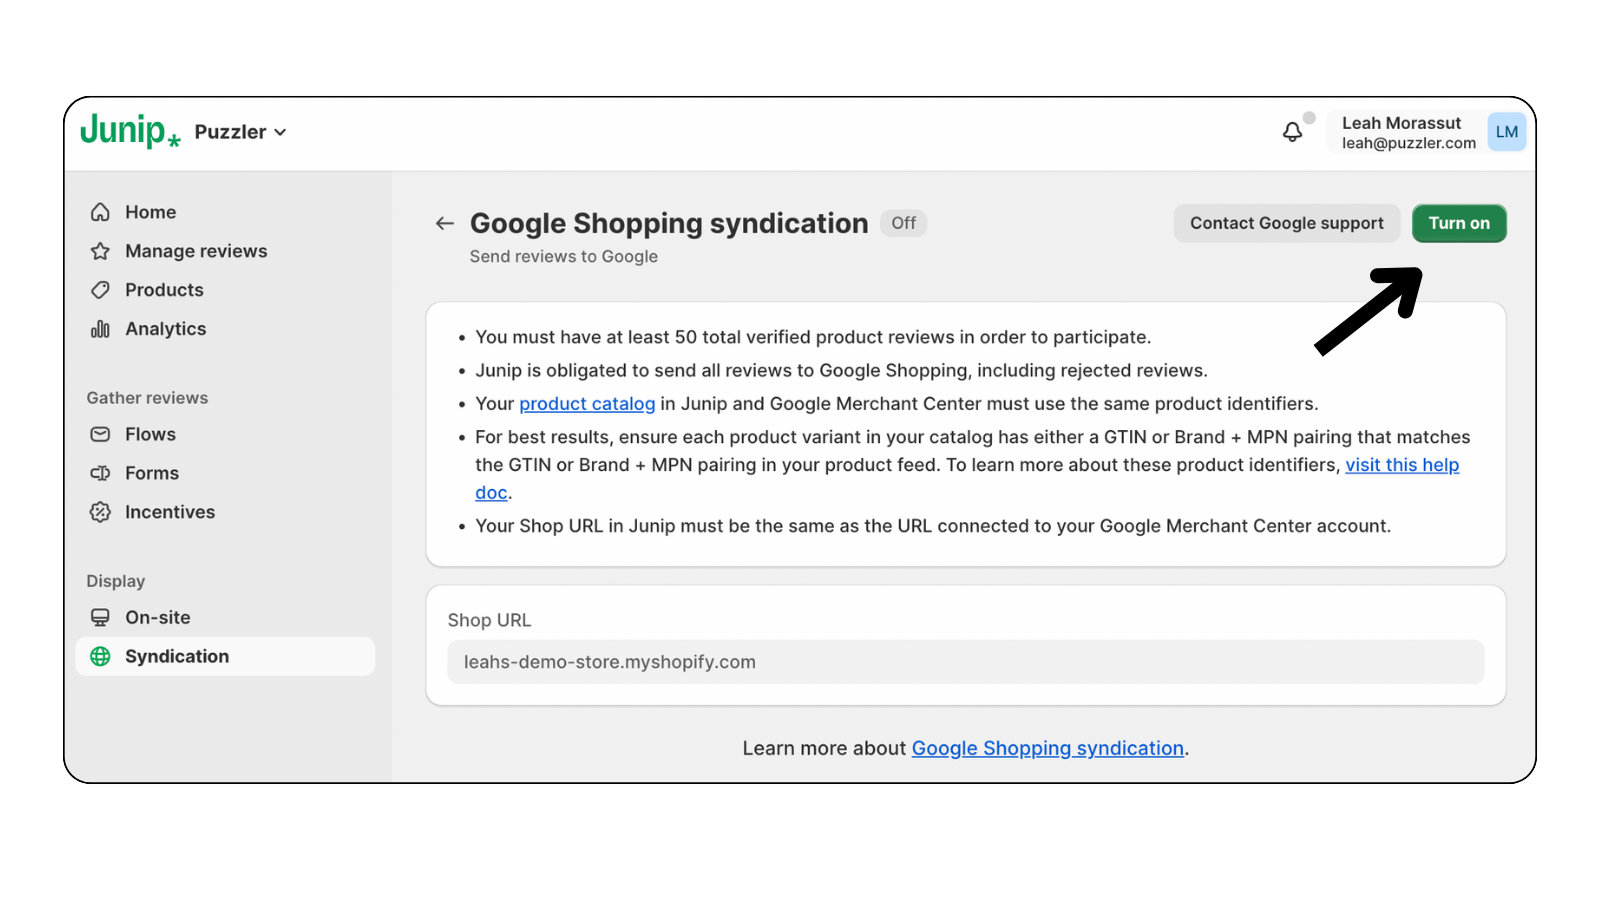 The complete guide to getting reviews in Google Shopping